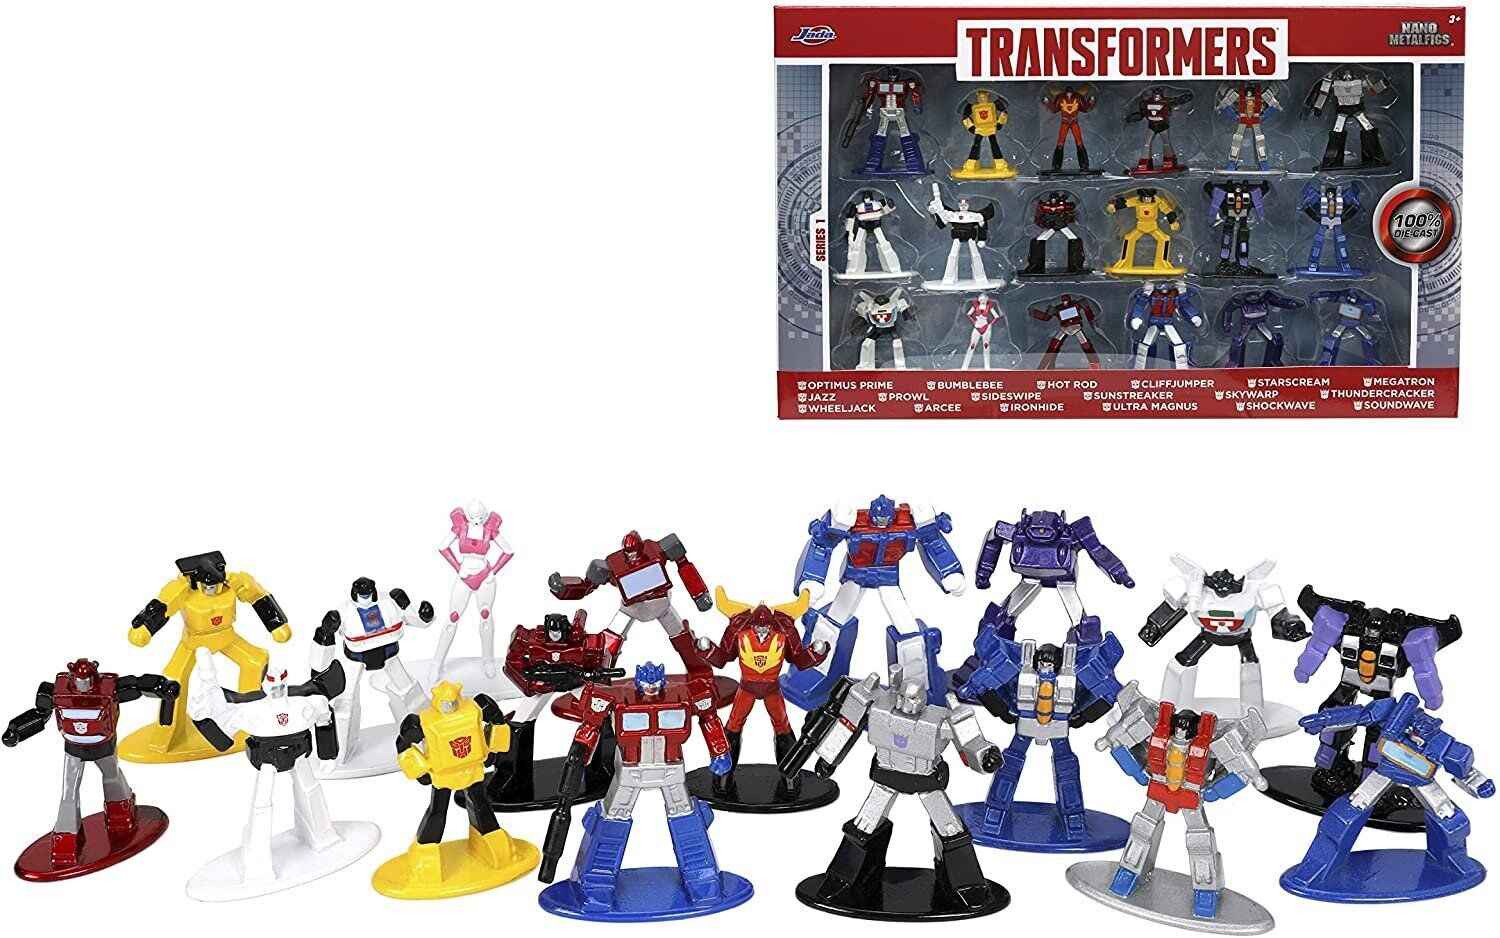 Jada Toys Transformers 18-Pack 1.65" Die-cast Figures, Toys for Kids and...